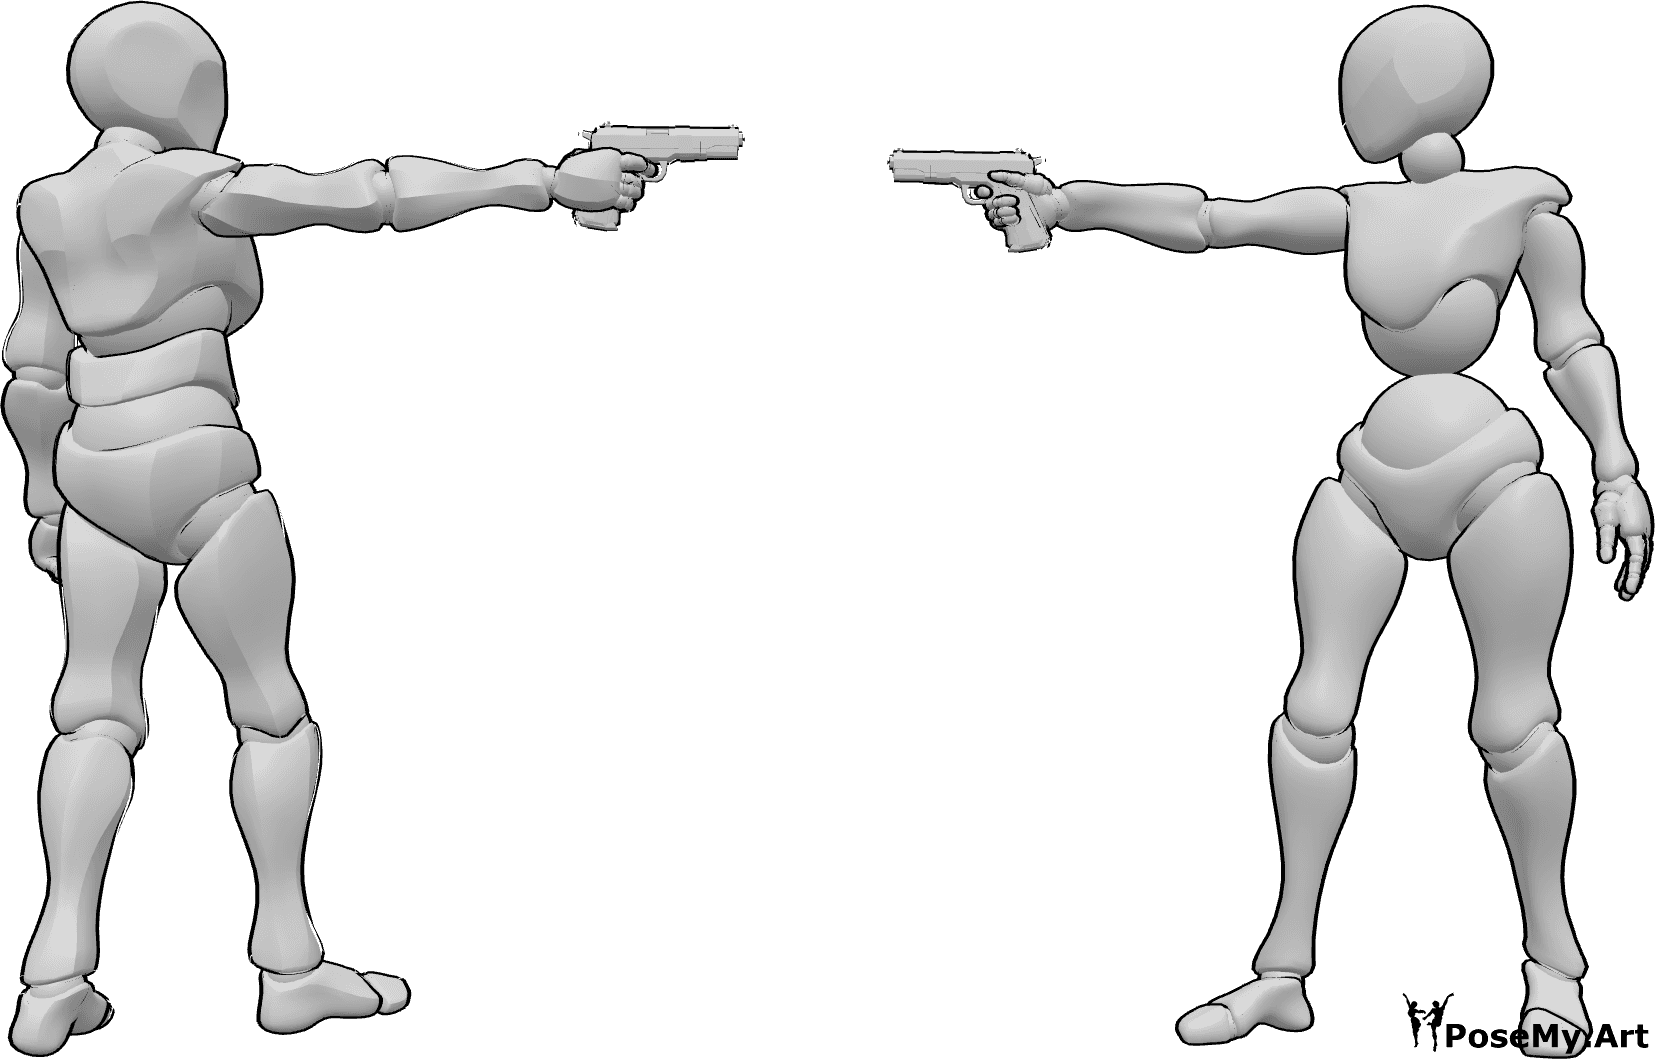 Pose Reference- Pistol aiming pose - Female and male are standing and aiming their pistols at each other